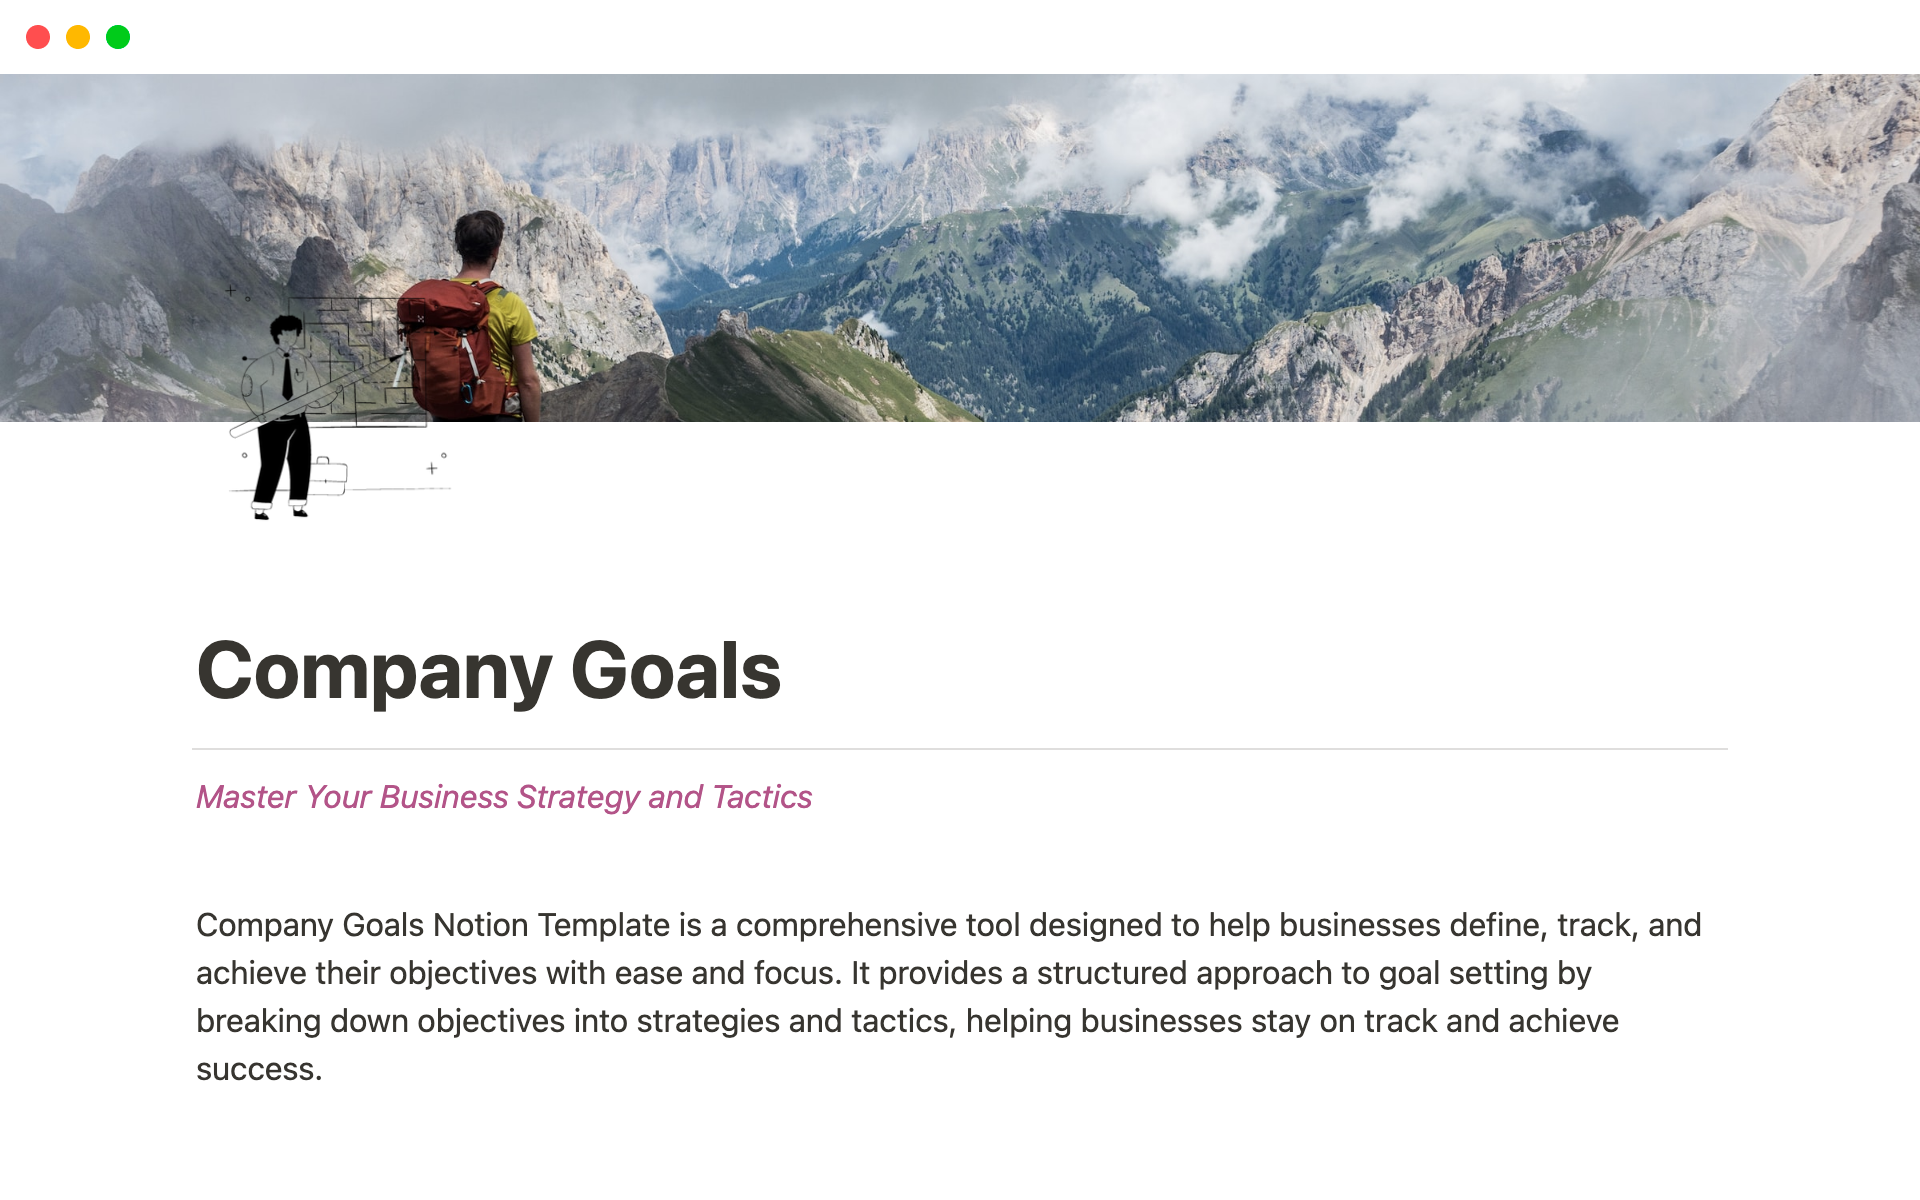 Company Goals Notion Template is a comprehensive tool designed to help businesses define, track, and achieve their objectives with ease and focus.